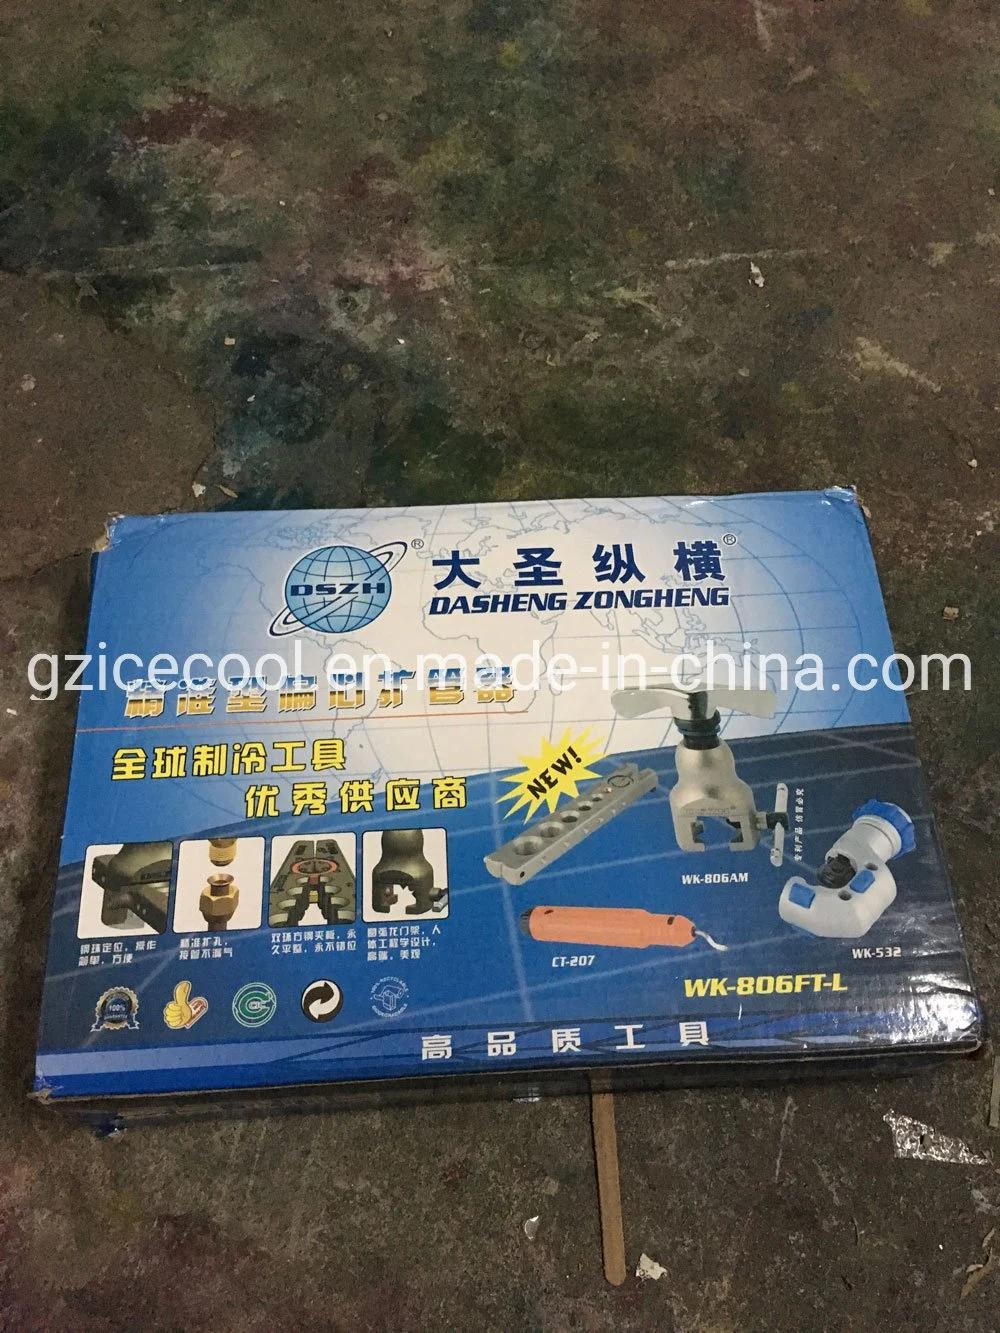 Wk-808FT-L 45 Degree Dszh Eccentric Cone Type Flaring Tools for 3/16 to 3/4 (5mm-19mm)